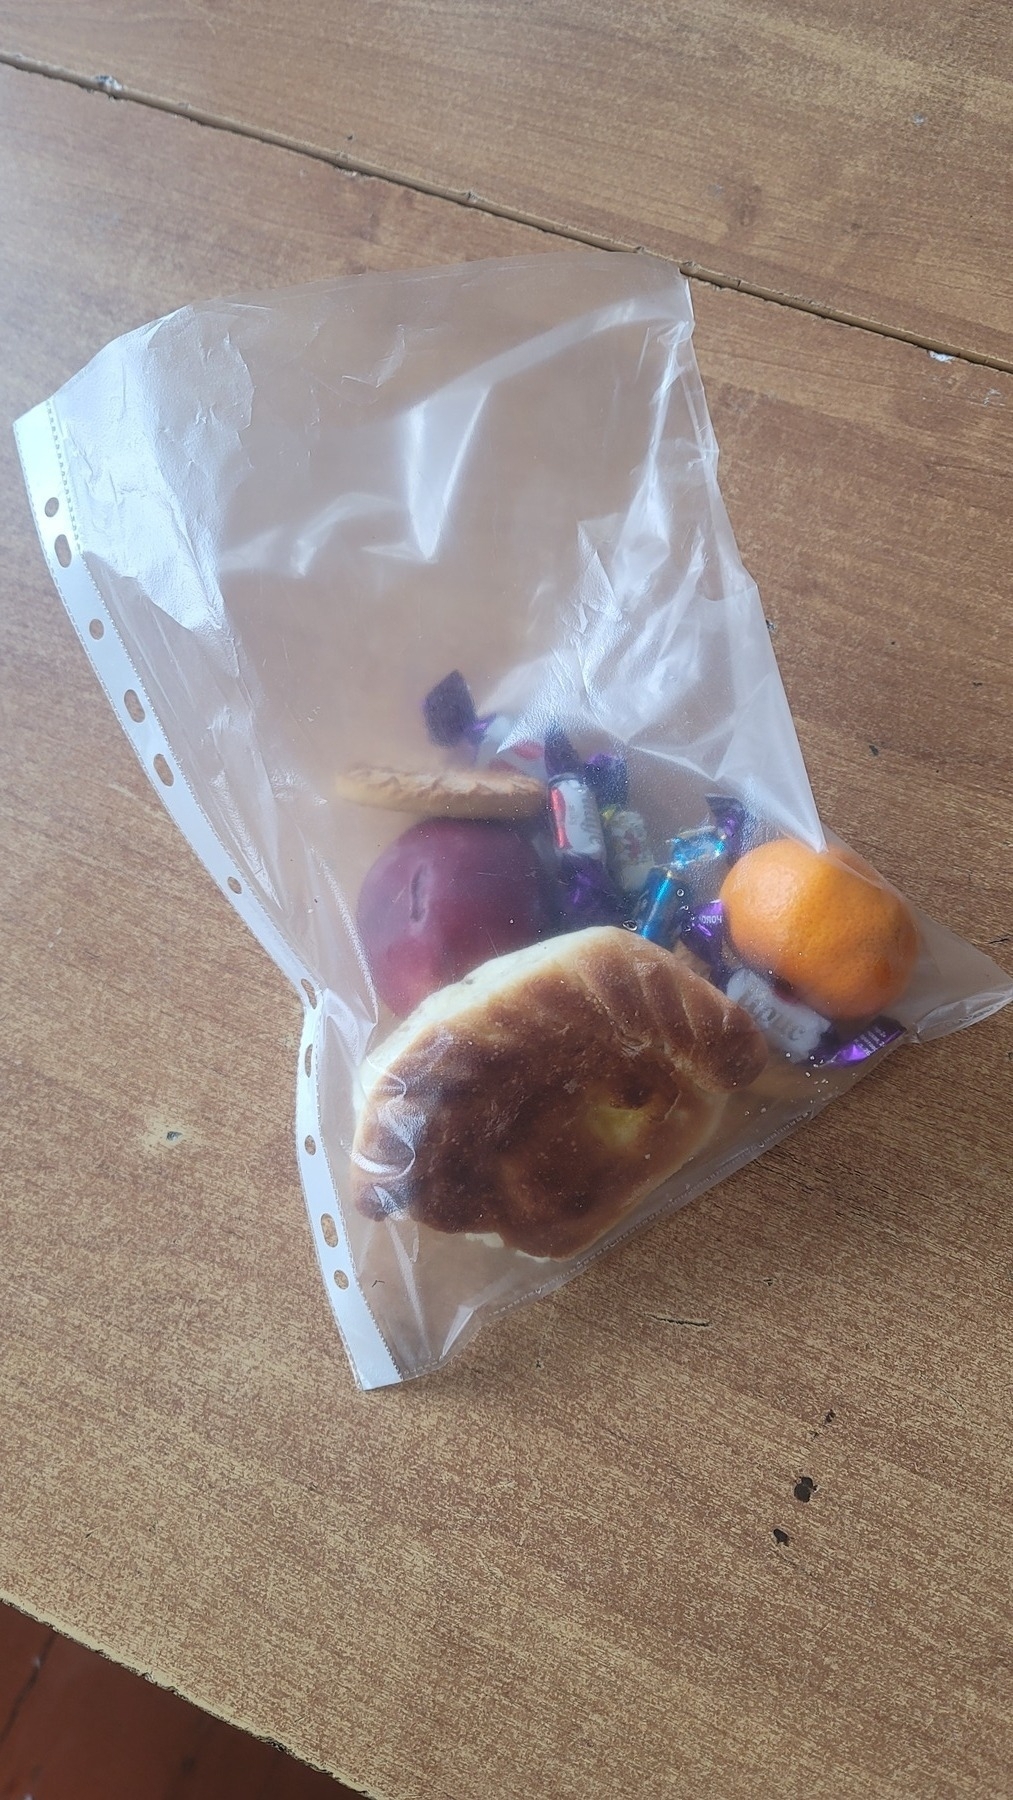 bread bun with potato filling, apple, tangerine and candies inside a plastic sheet protector